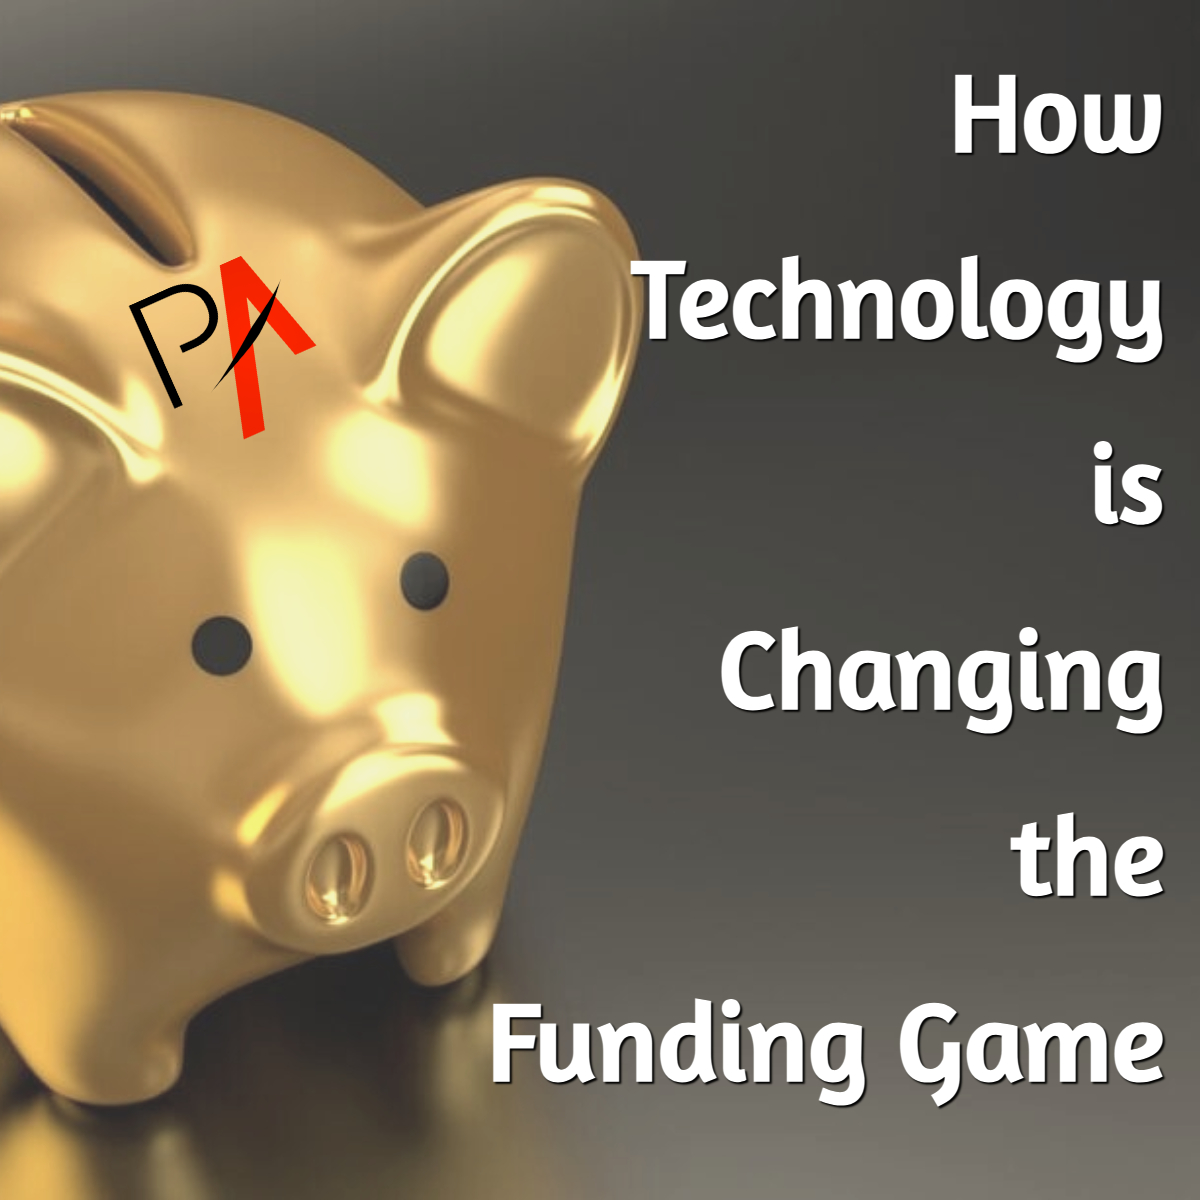 How Technology is Changing the Funding Game